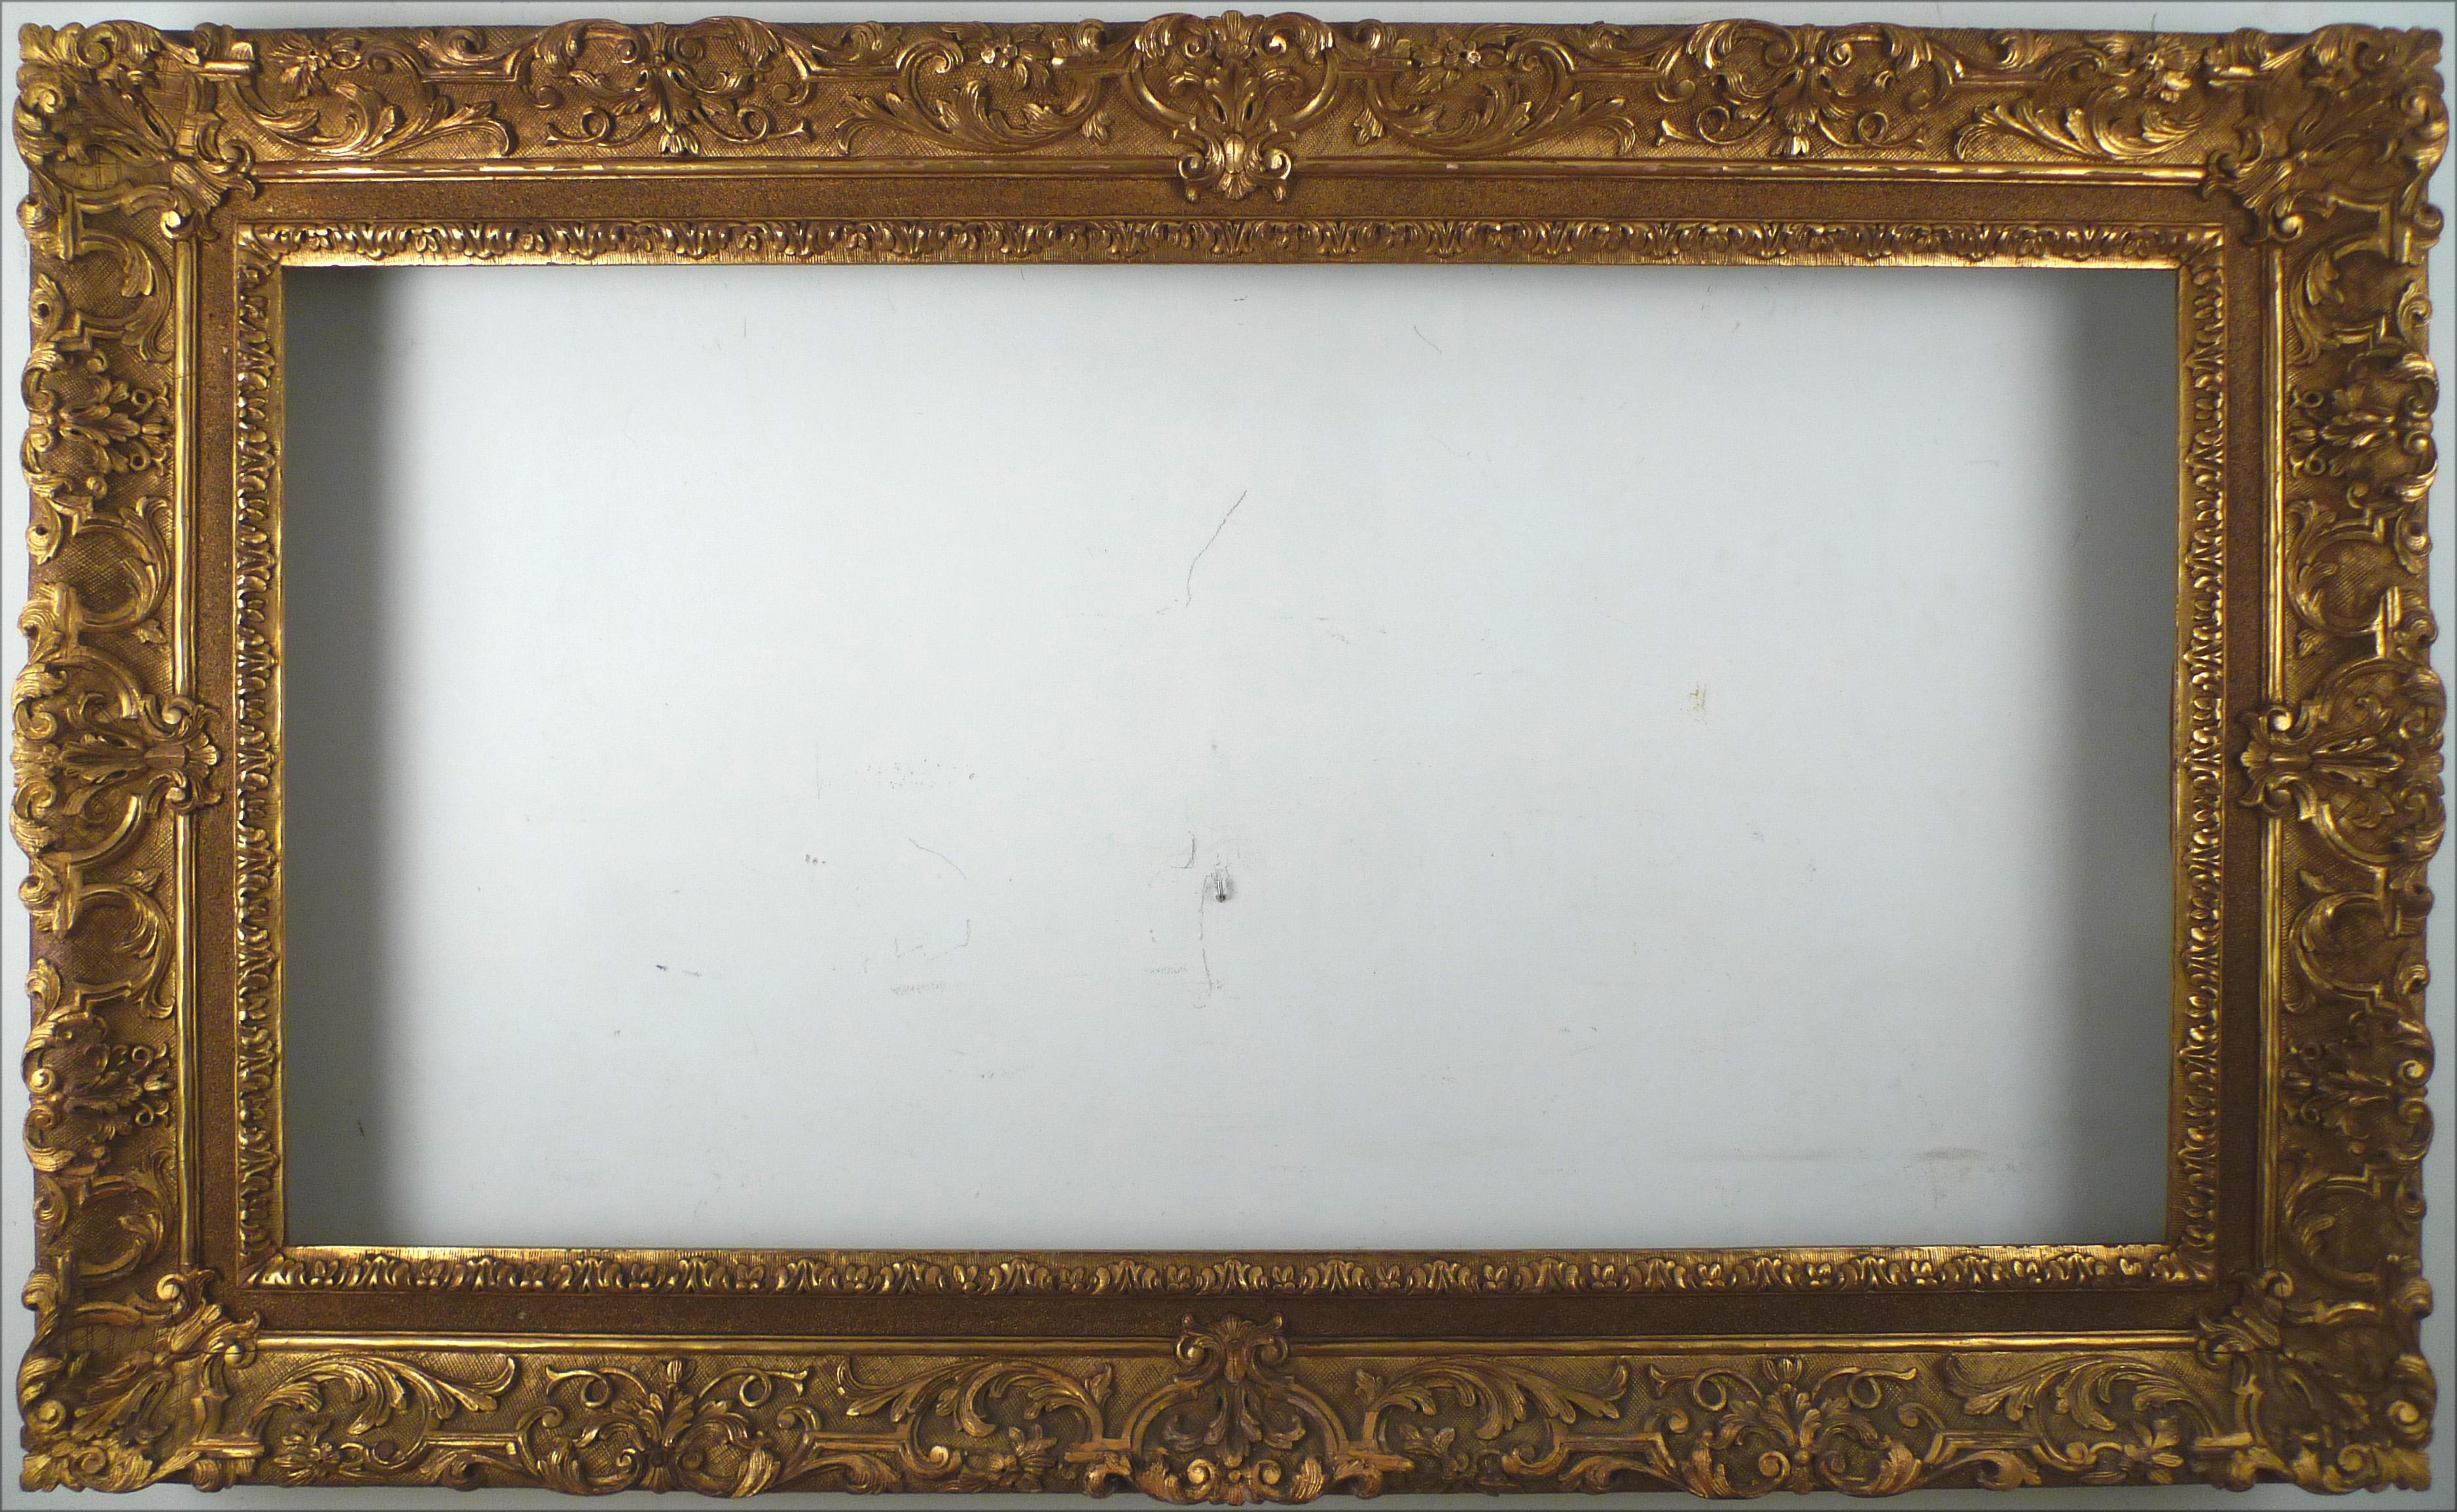 LOUIS XV WOOD CARVED AND GILT FRAME
Interior measurement: 57 x 110 cm.
Exterior measurement: 84 x 137 cm.